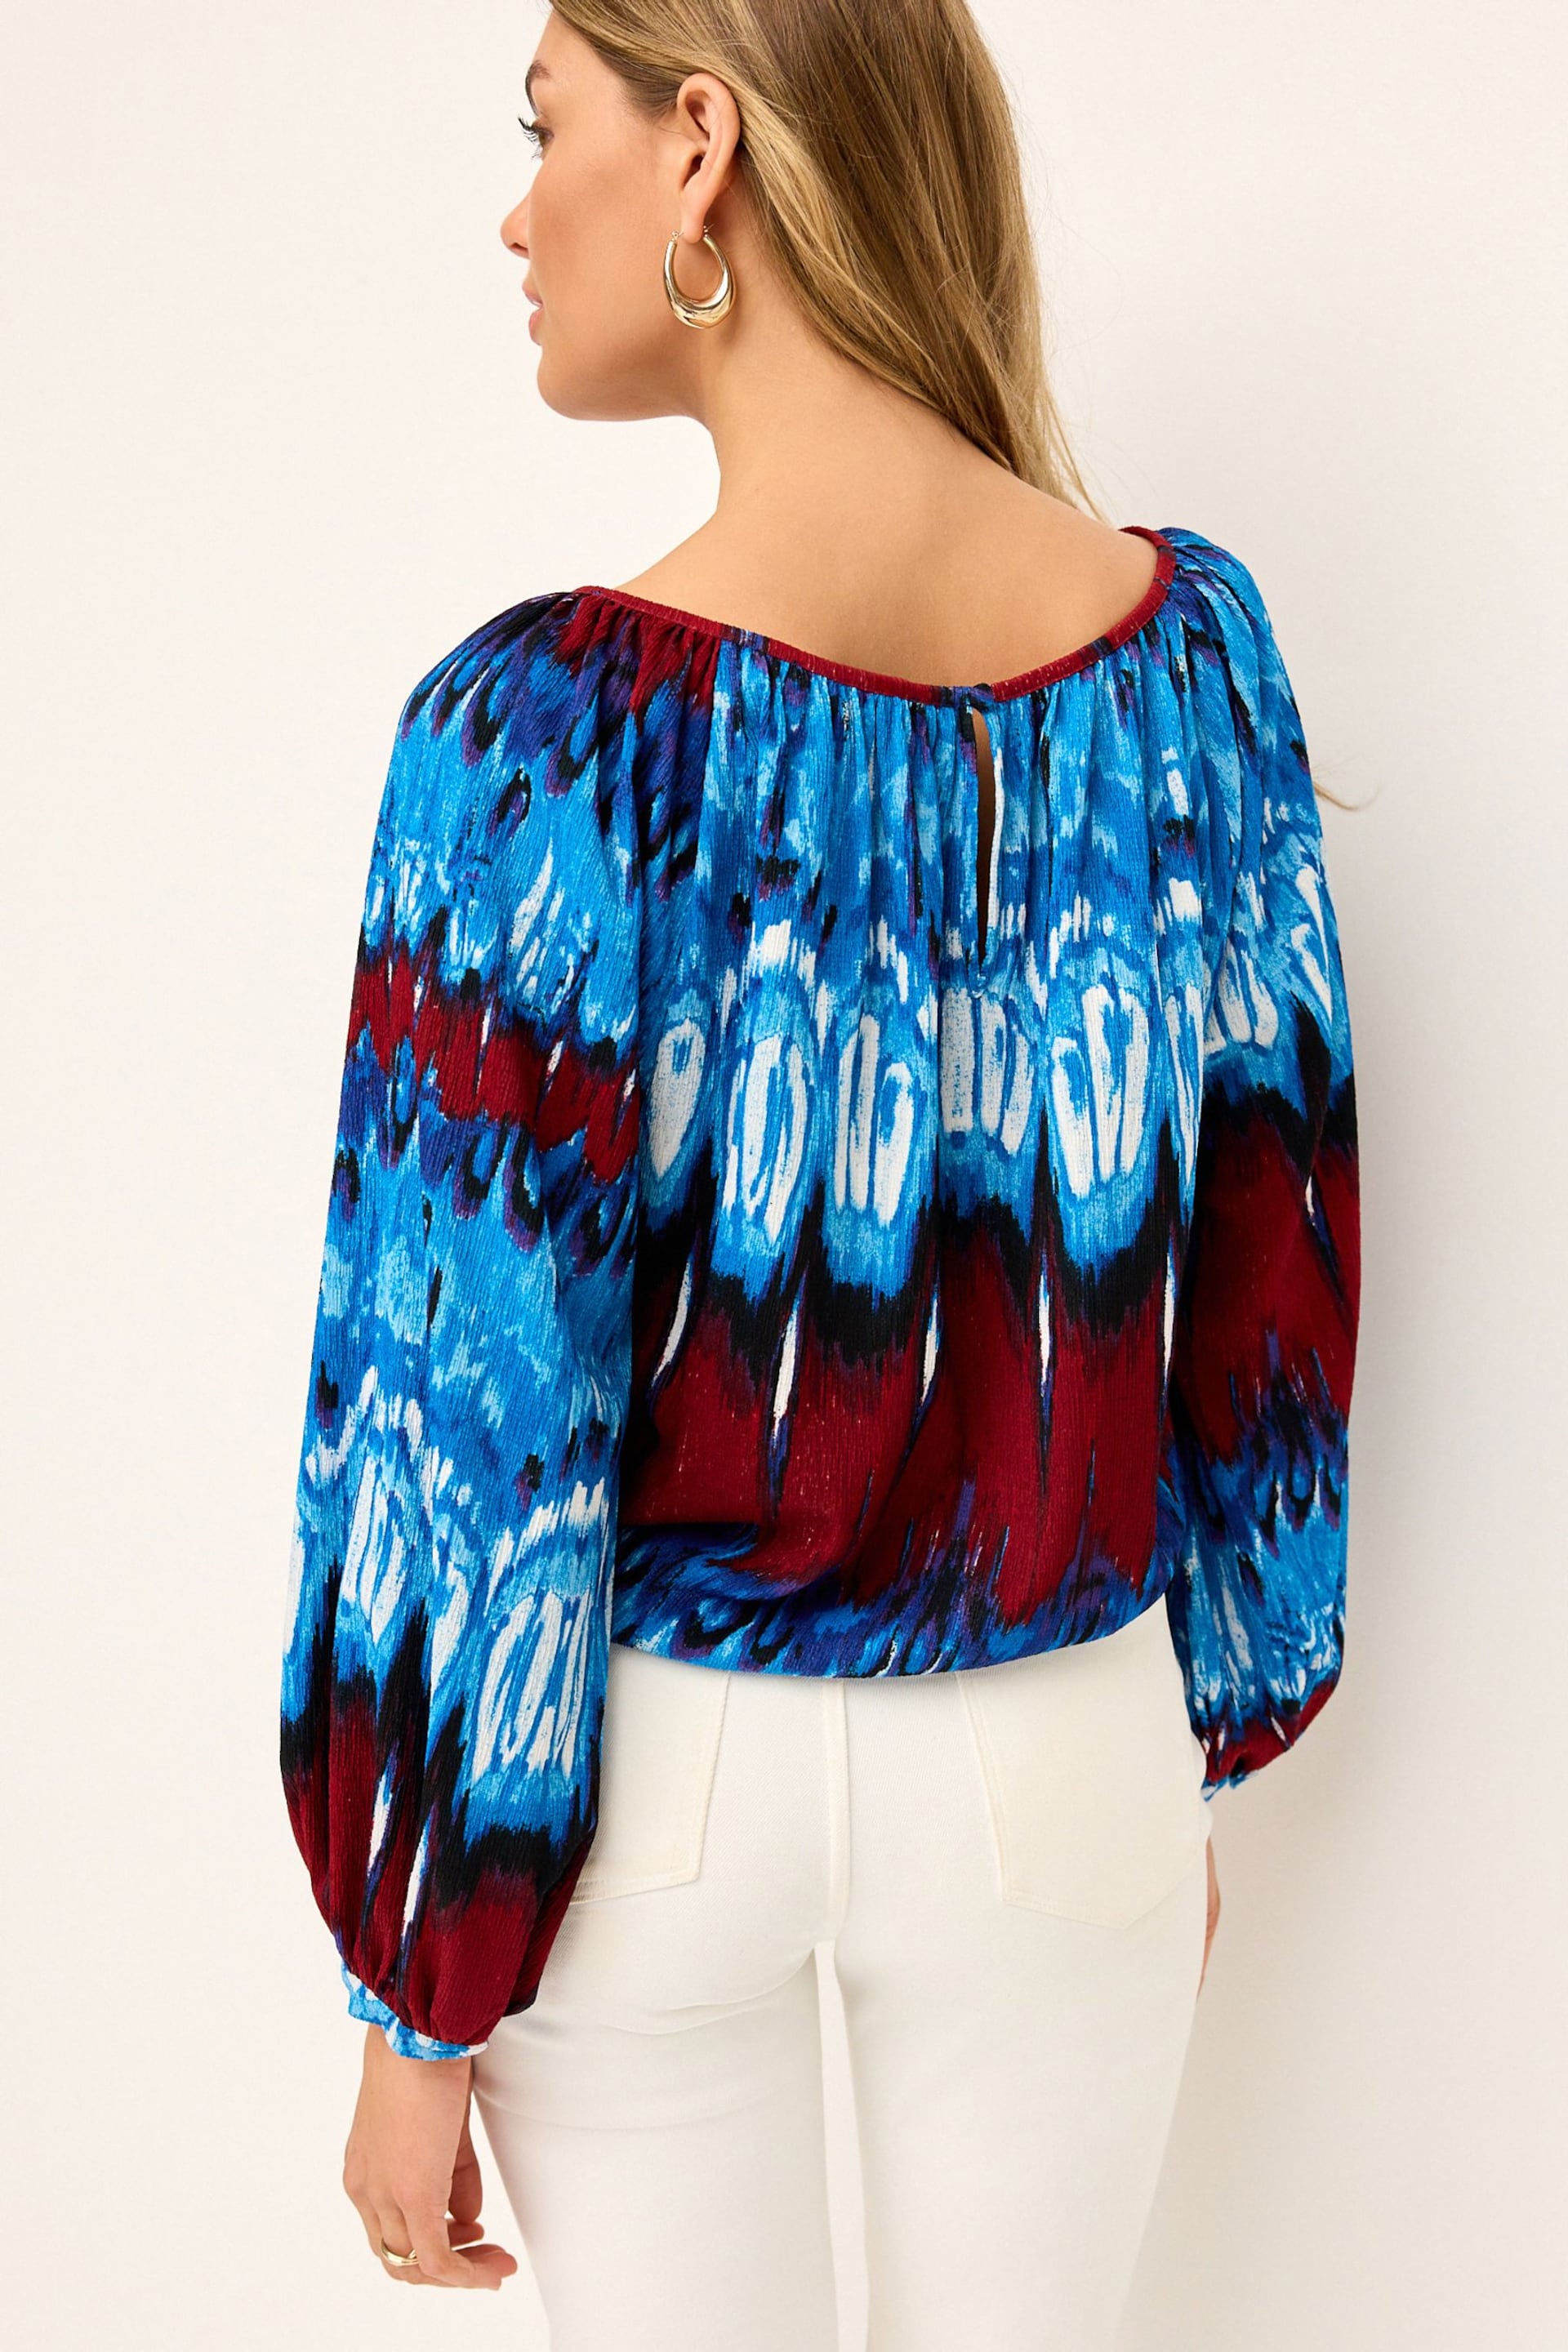 Blue Tie-Dye Print Boat Neck Textured Blouse - Image 3 of 5